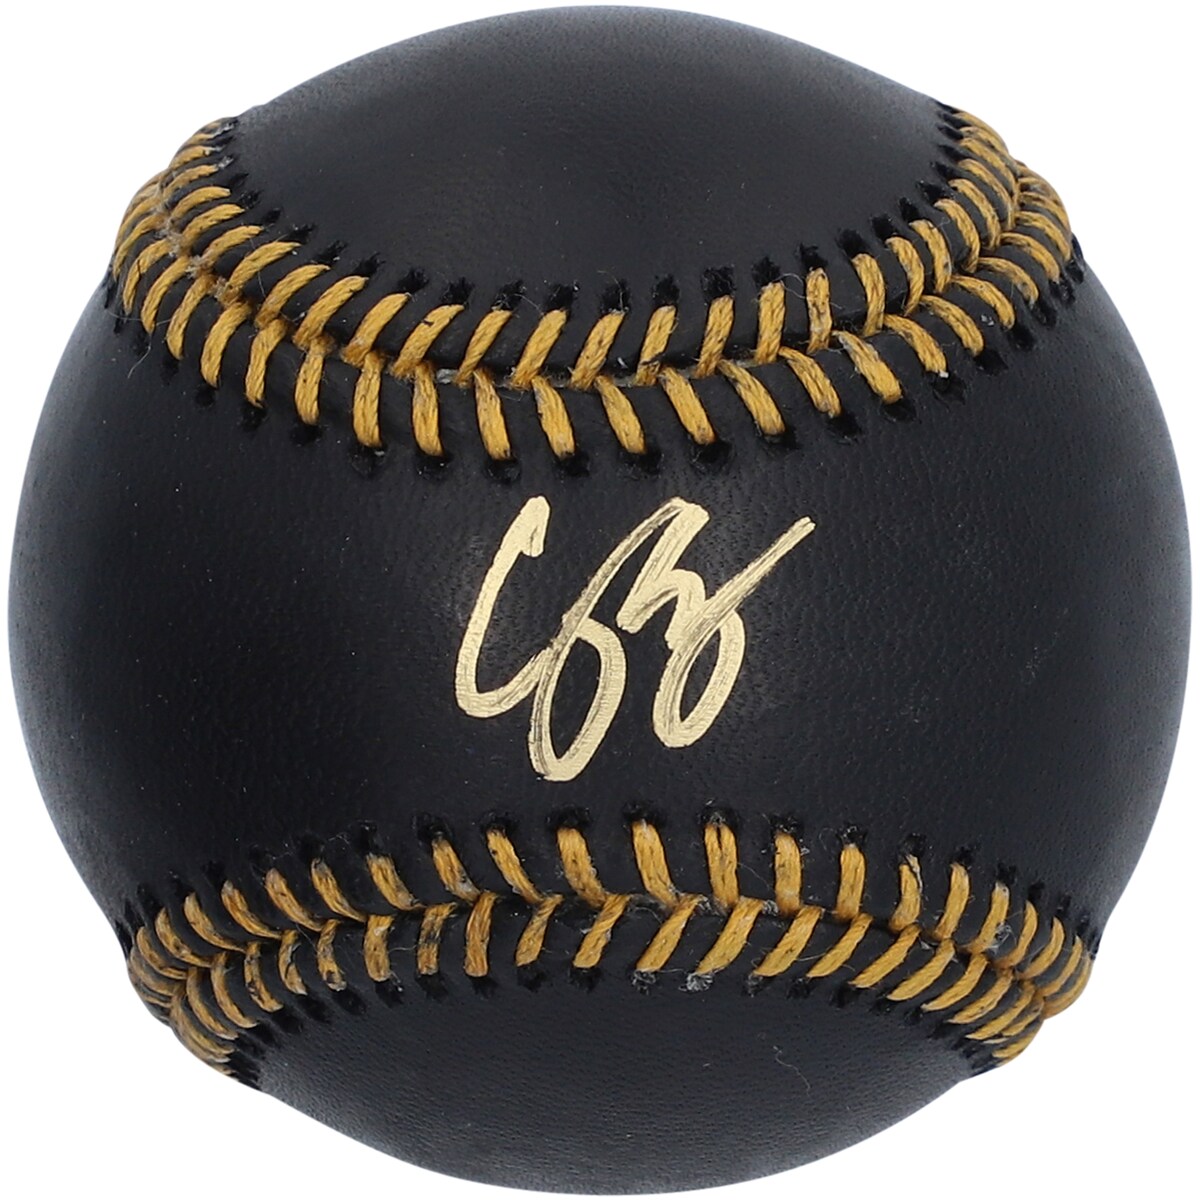 Autographed by Corey Seager, this Black Leather Baseball is ready to flaunt your Texas Rangers fandom. Featuring a unique design, this piece of memorabilia is an essential keepsake for any Texas Rangers fan. It showcases Corey Seager's distinct signature to provide a noteworthy piece to your collection.Signature may varyObtained under the auspices of the Major League Baseball Authentication Program and can be verified by its numbered hologram at MLB.comHand-signed autographBrand: Fanatics AuthenticIncludes an individually numbered, tamper-evident hologramOfficially licensed